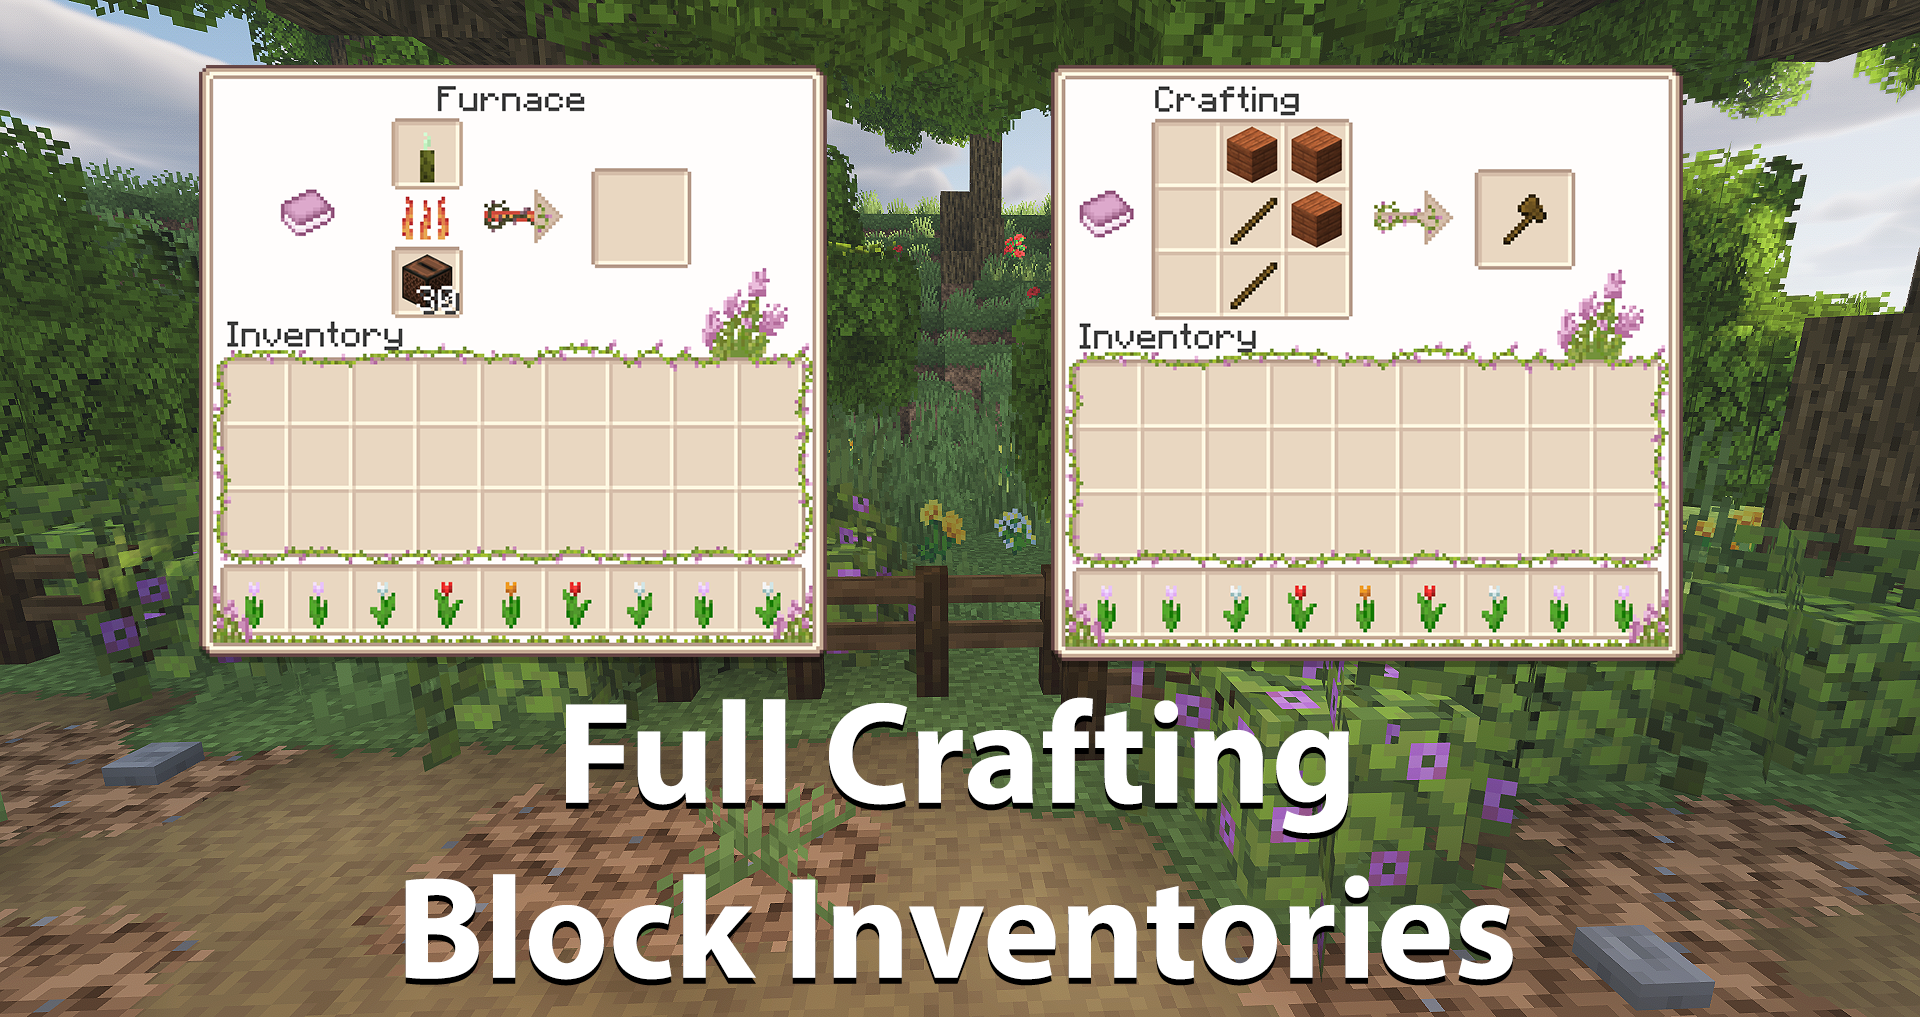 Crafting station inventories